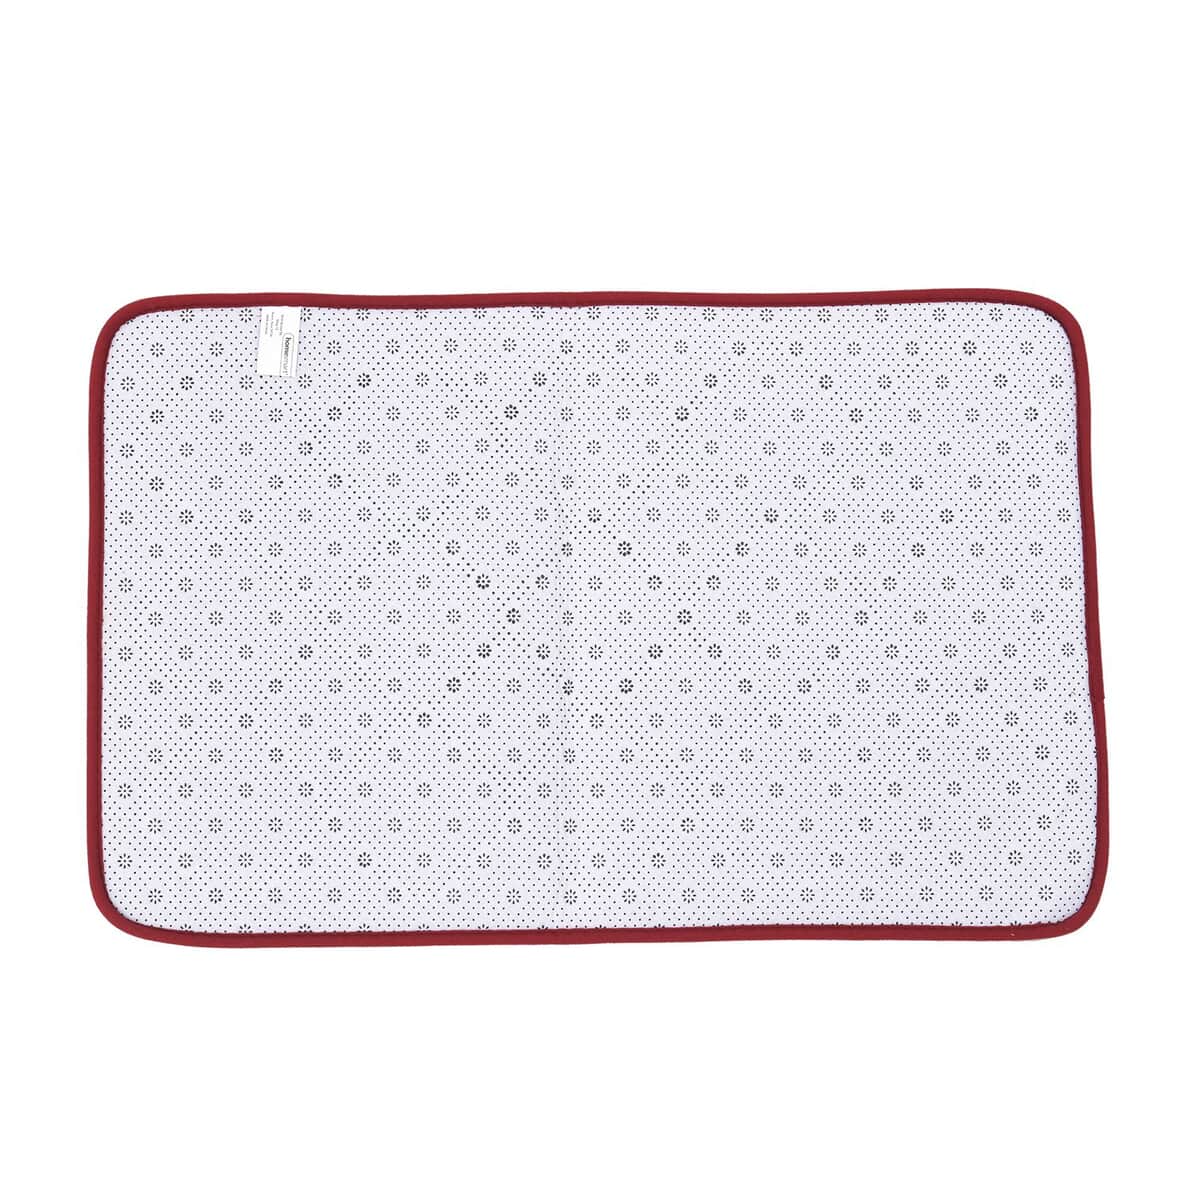 Homesmart Red Embossed Flannel Non-Woven Anti Slip Dot Backing Bath Mat and Contour Toilet Mat, Anti-Skid Quick Drying Handwash Bath Mat, Non Slip Bathroom Rug image number 5